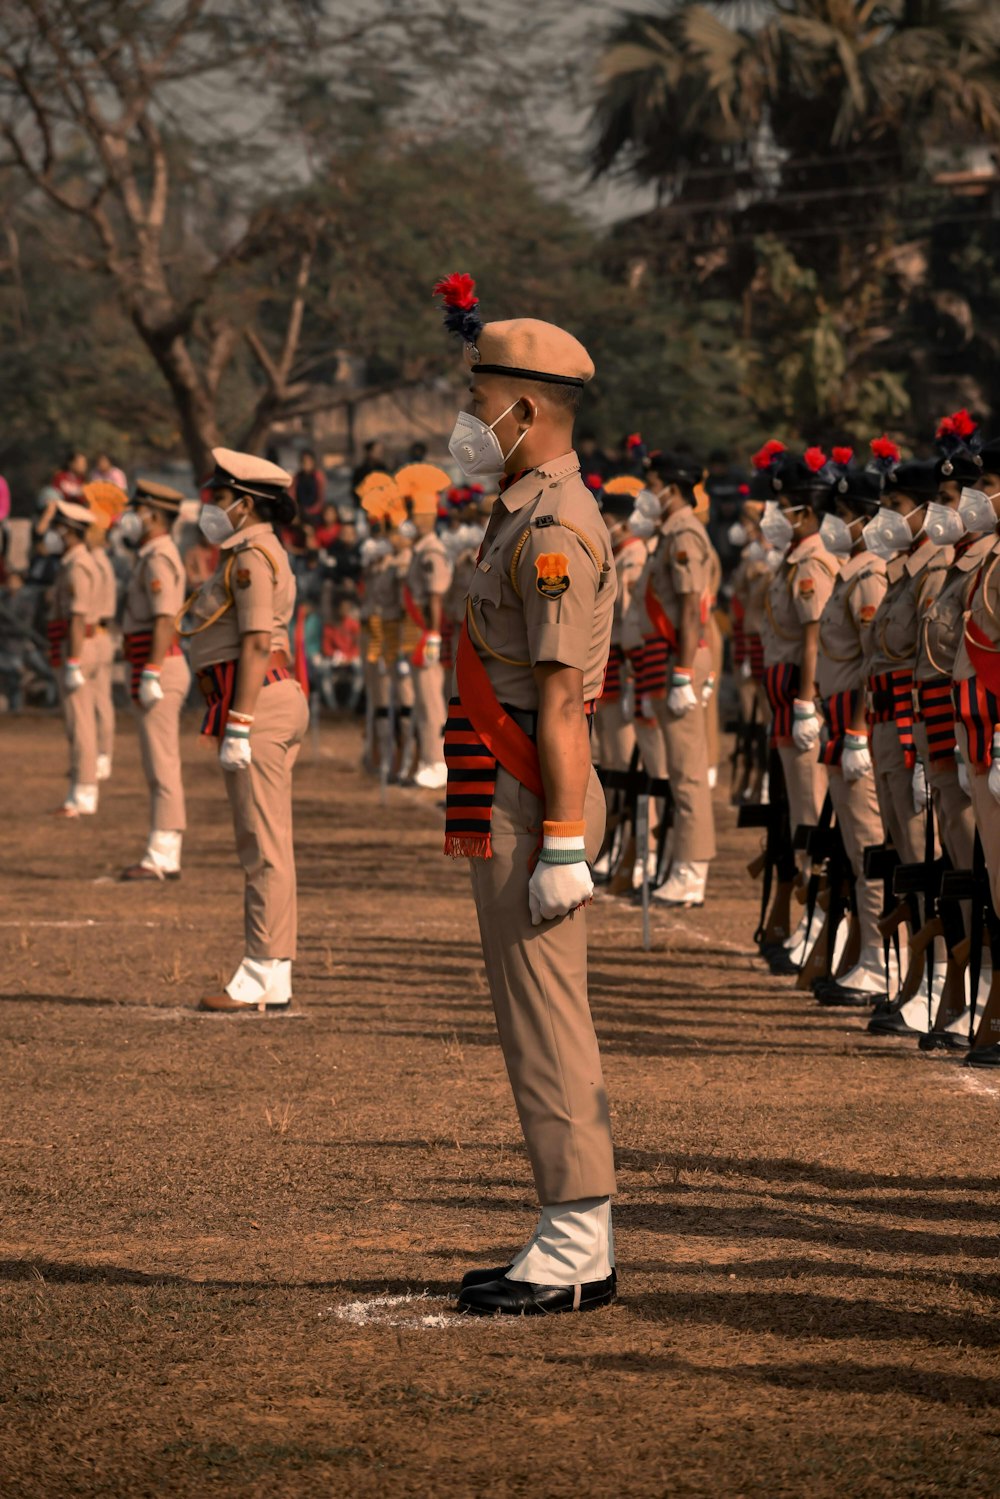 100+ Indian Army Pictures | Download Free Images on Unsplash